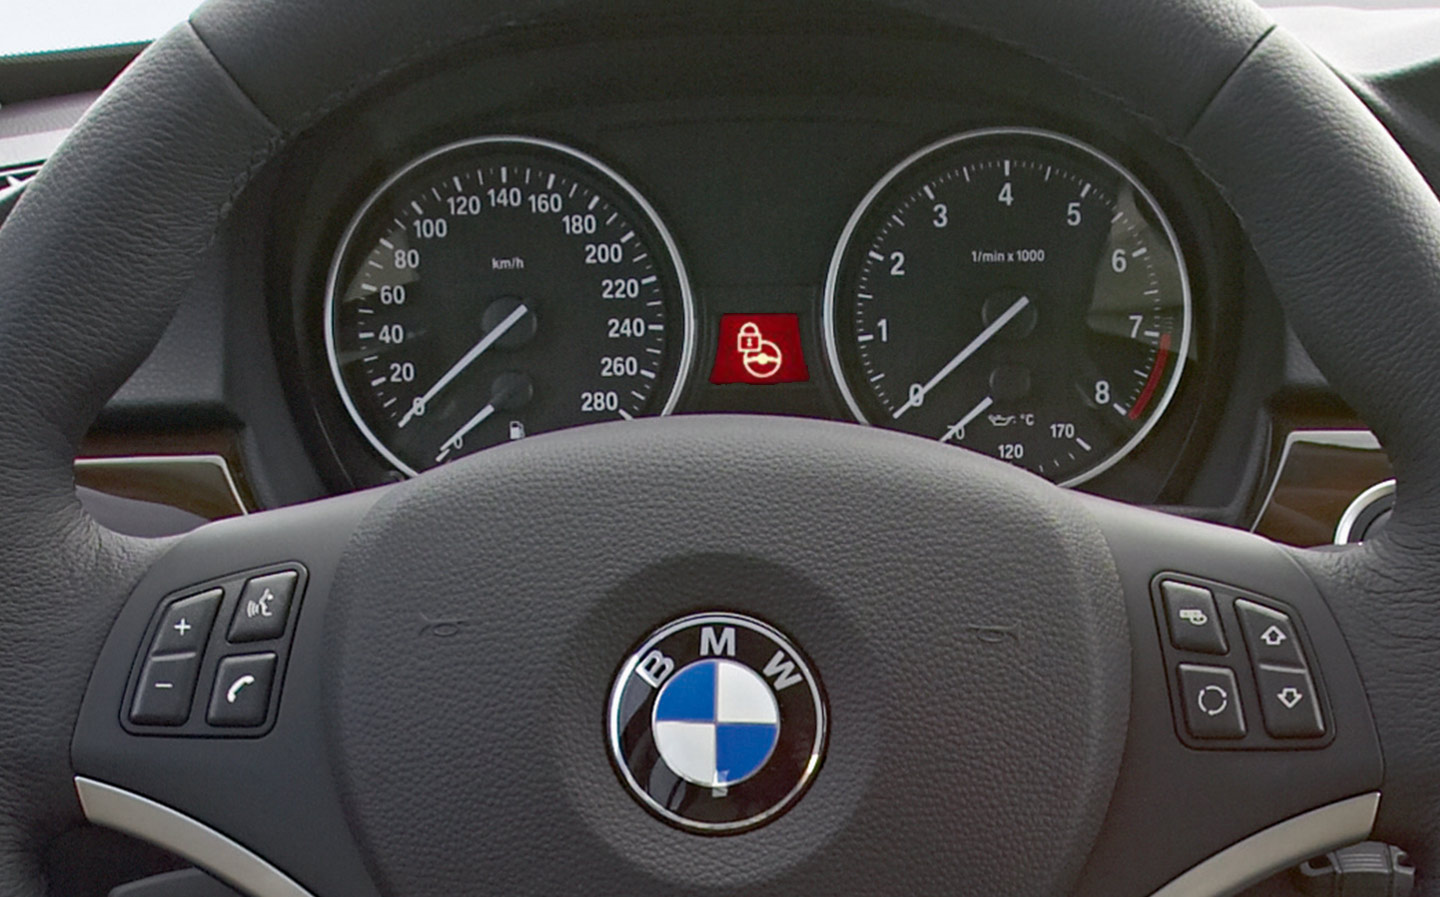 Car Clinic: Should I worry about a steering wheel lock warning on my BMW 3-series?